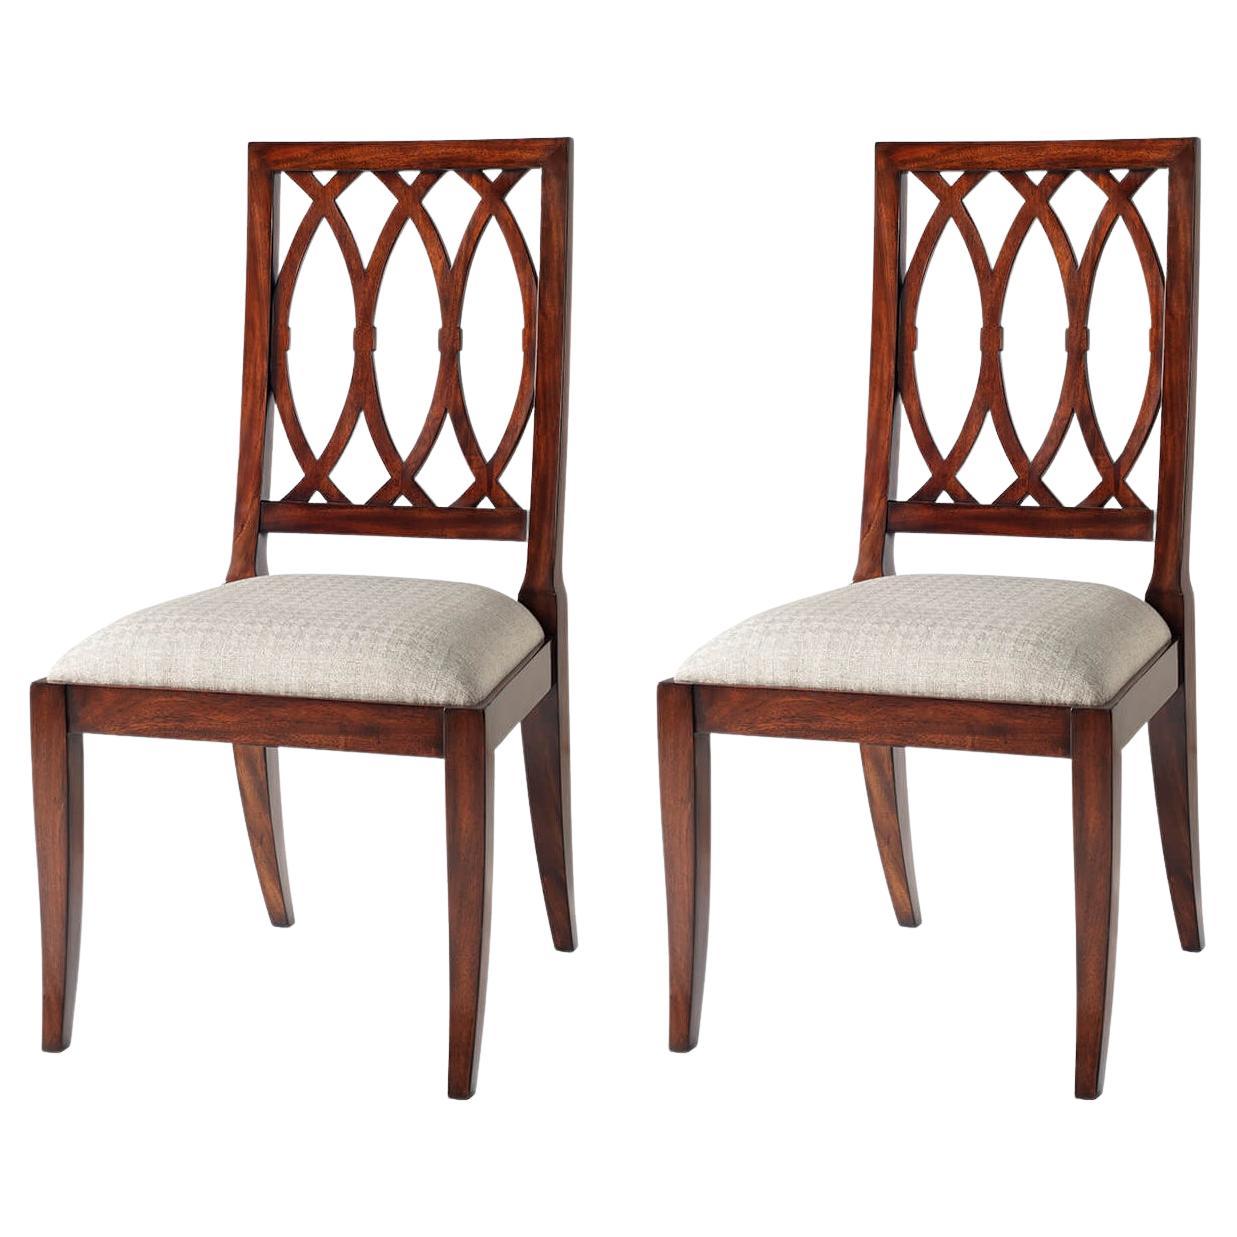 Two Modern Trellis Back Dining Chairs For Sale